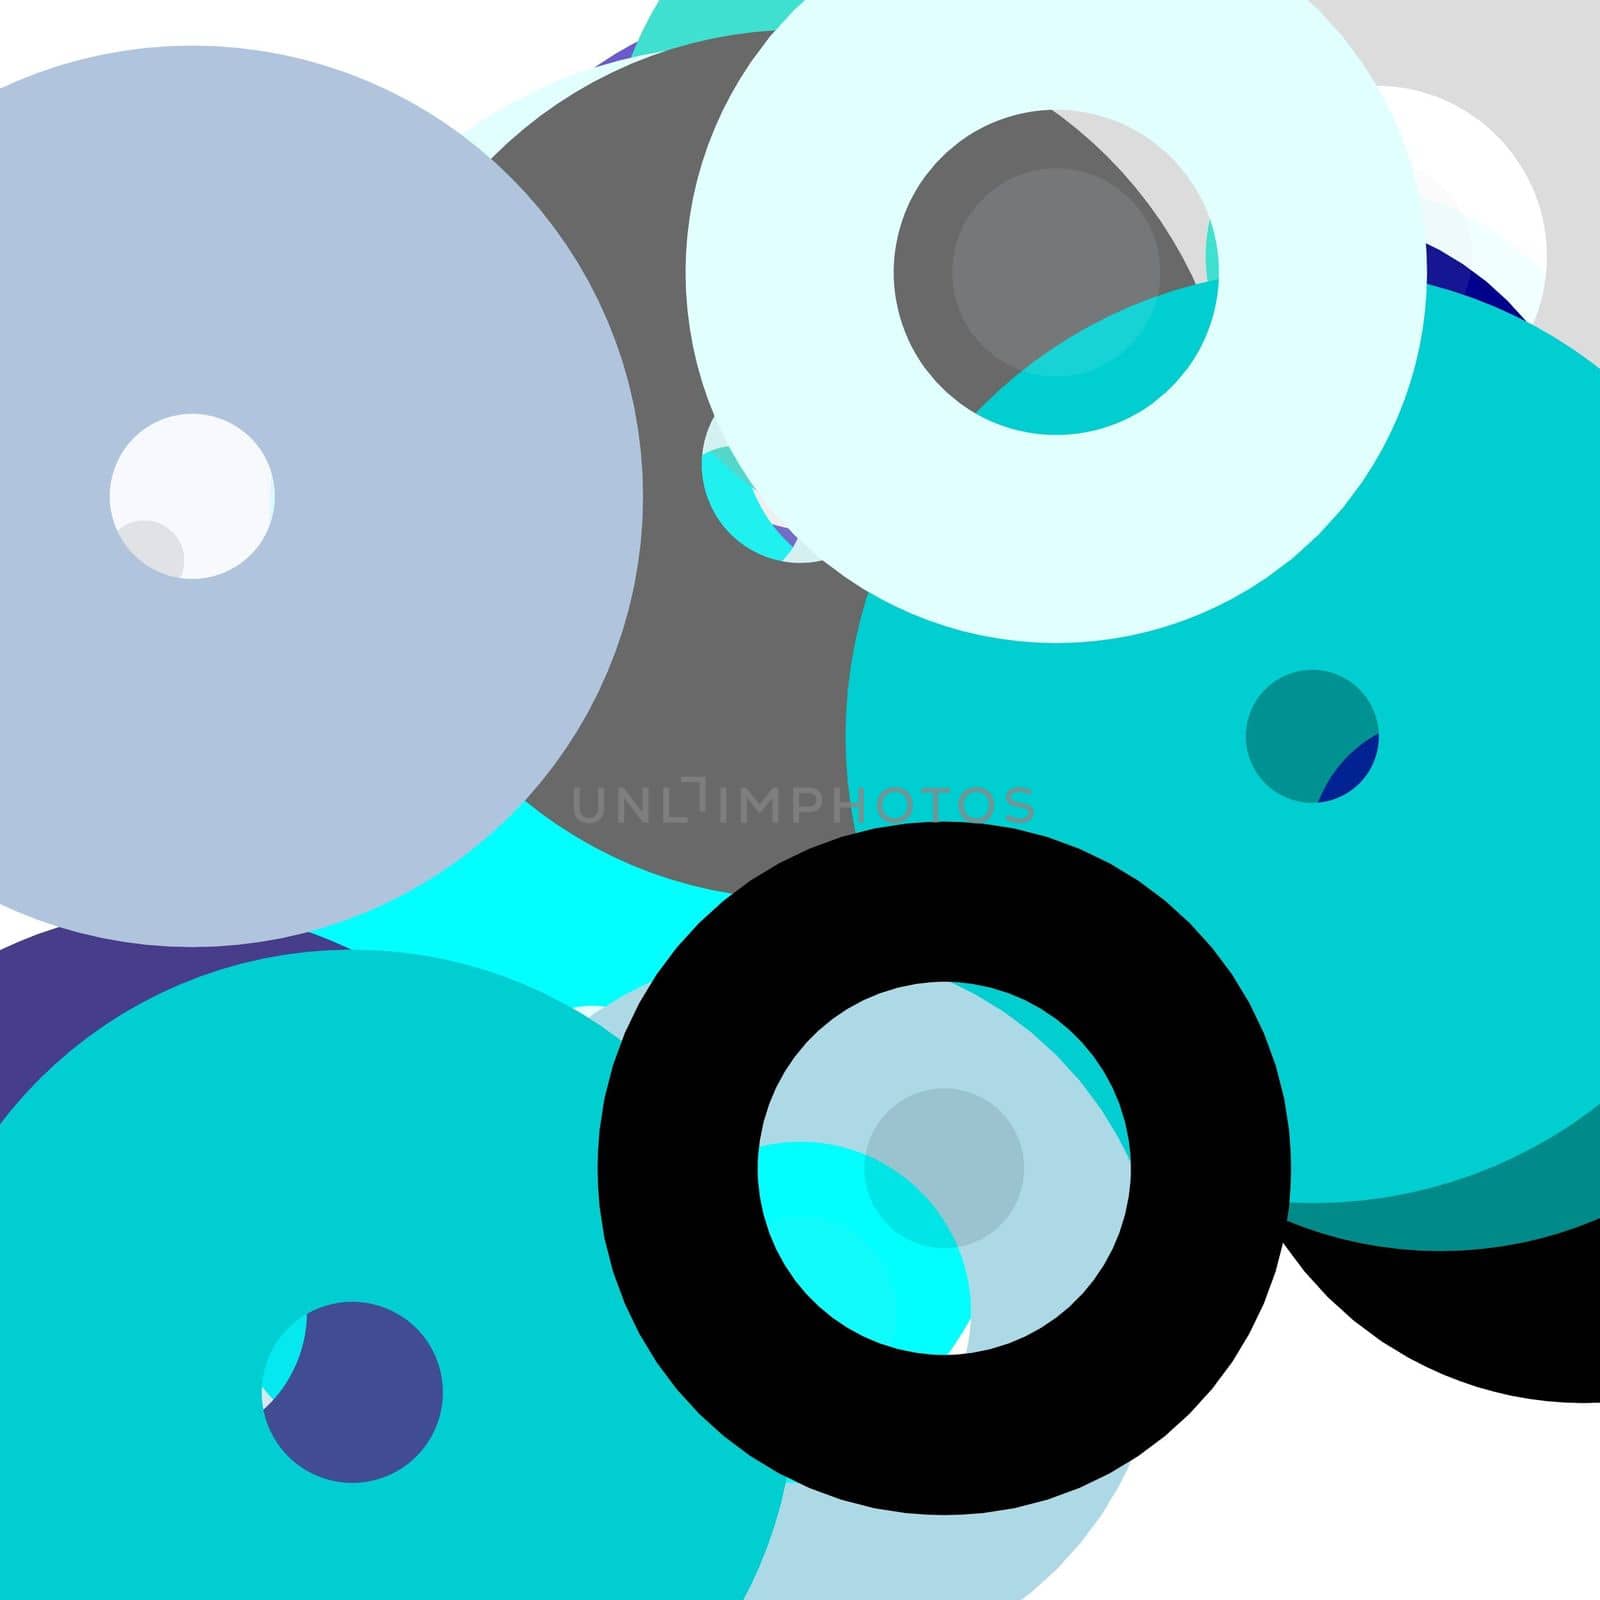 Abstract grey blue circles illustration background by claudiodivizia